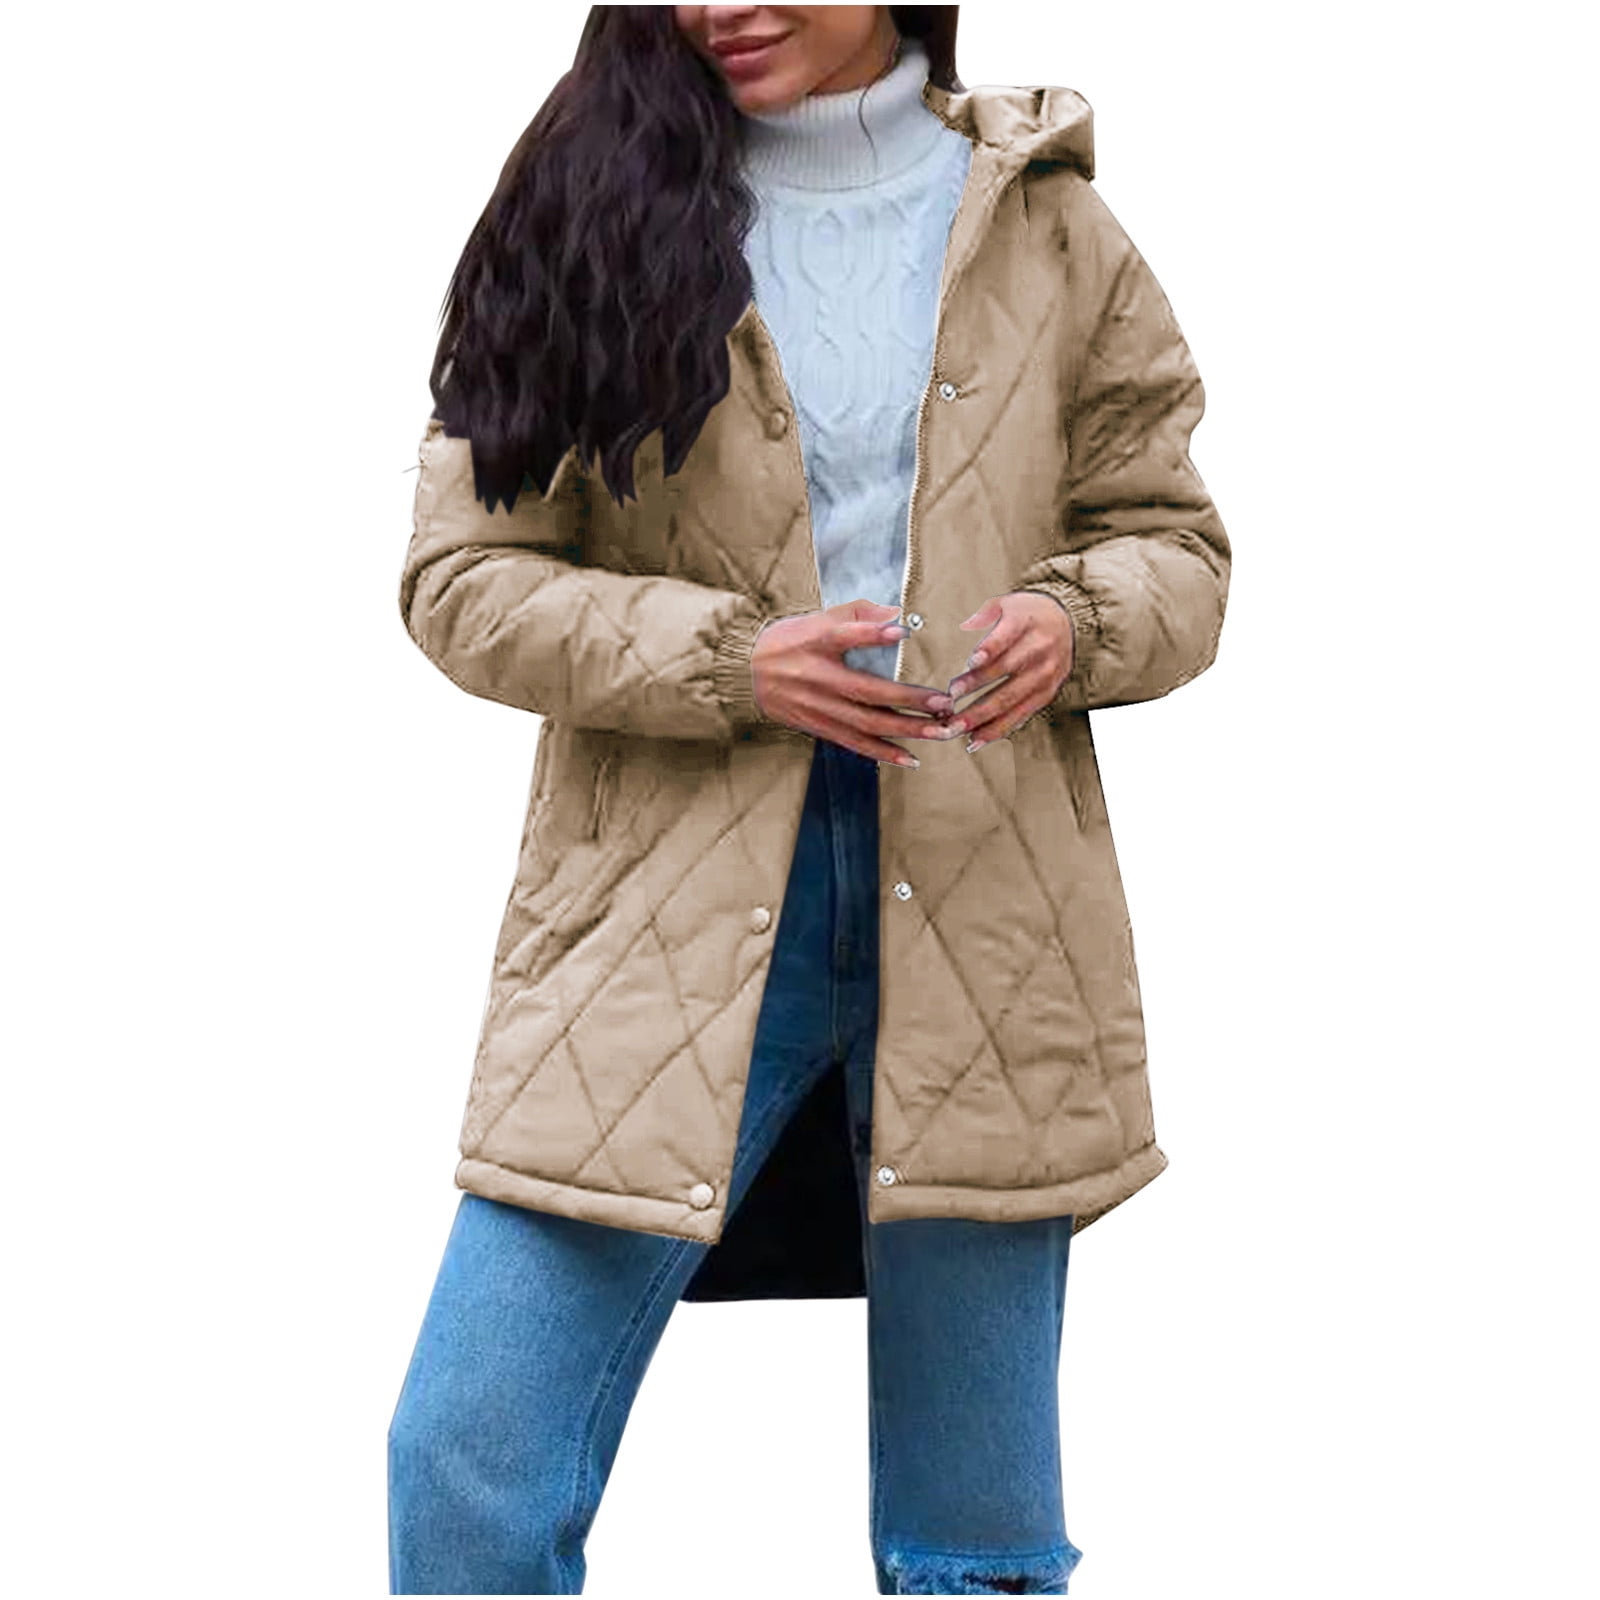 Lovskoo Womens Winter Coats Quilted Jacket Warm Clothes Plus Size Hooded Cotton Padded Coat Long 4043